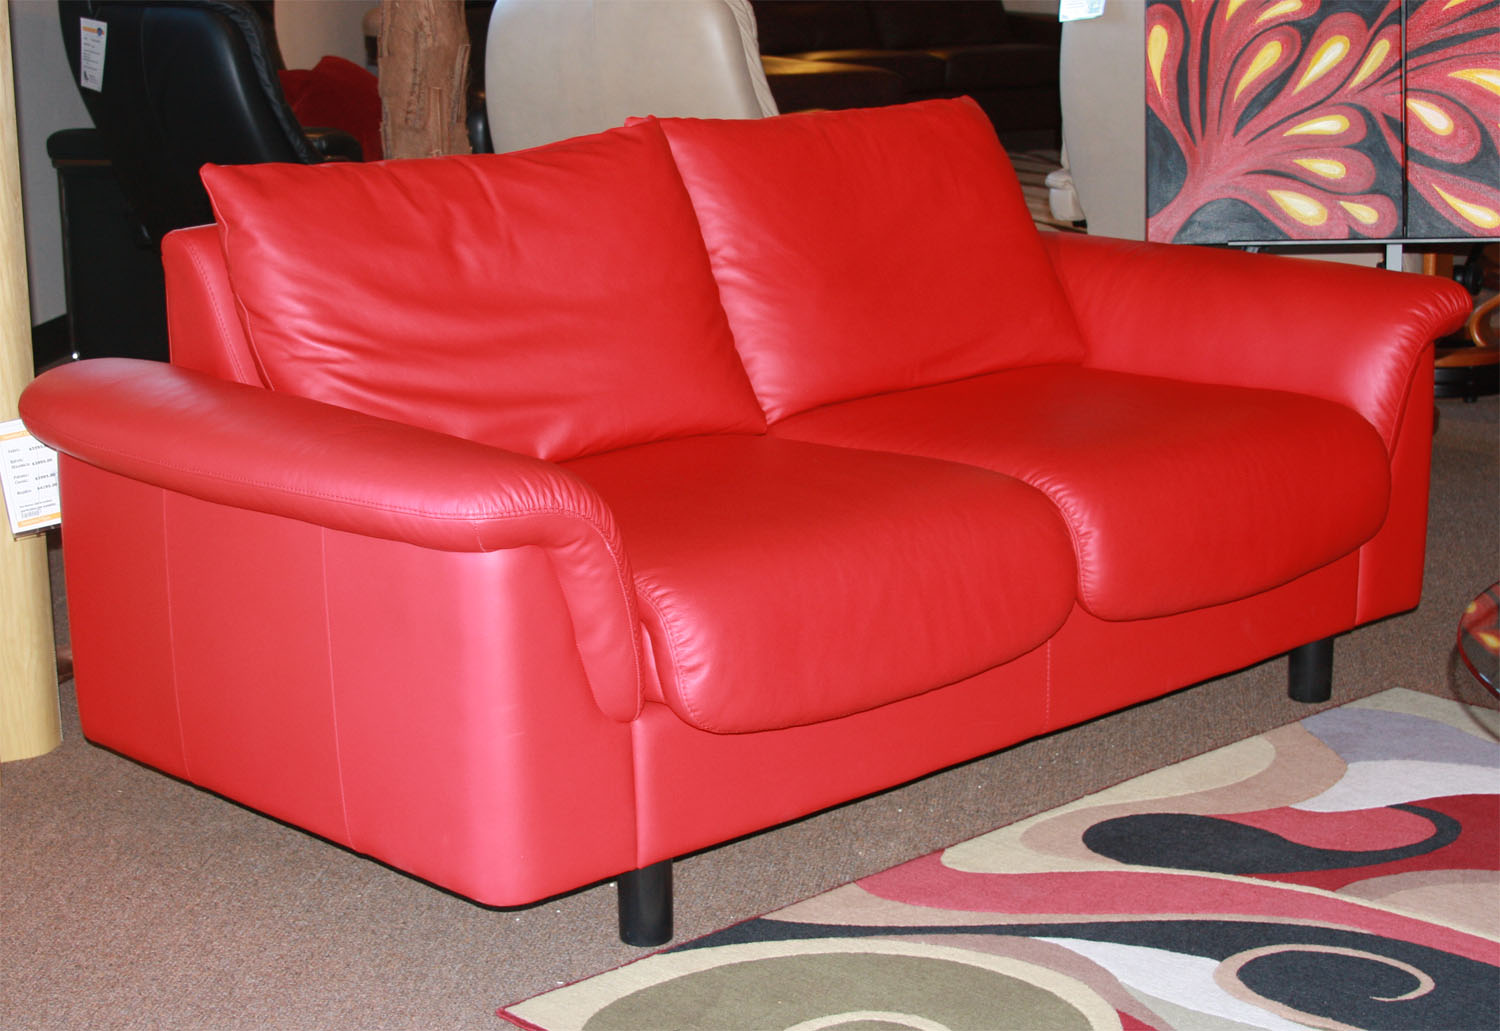 Stressless Paloma Chilli Red Leather Color Sofa from Ekornes